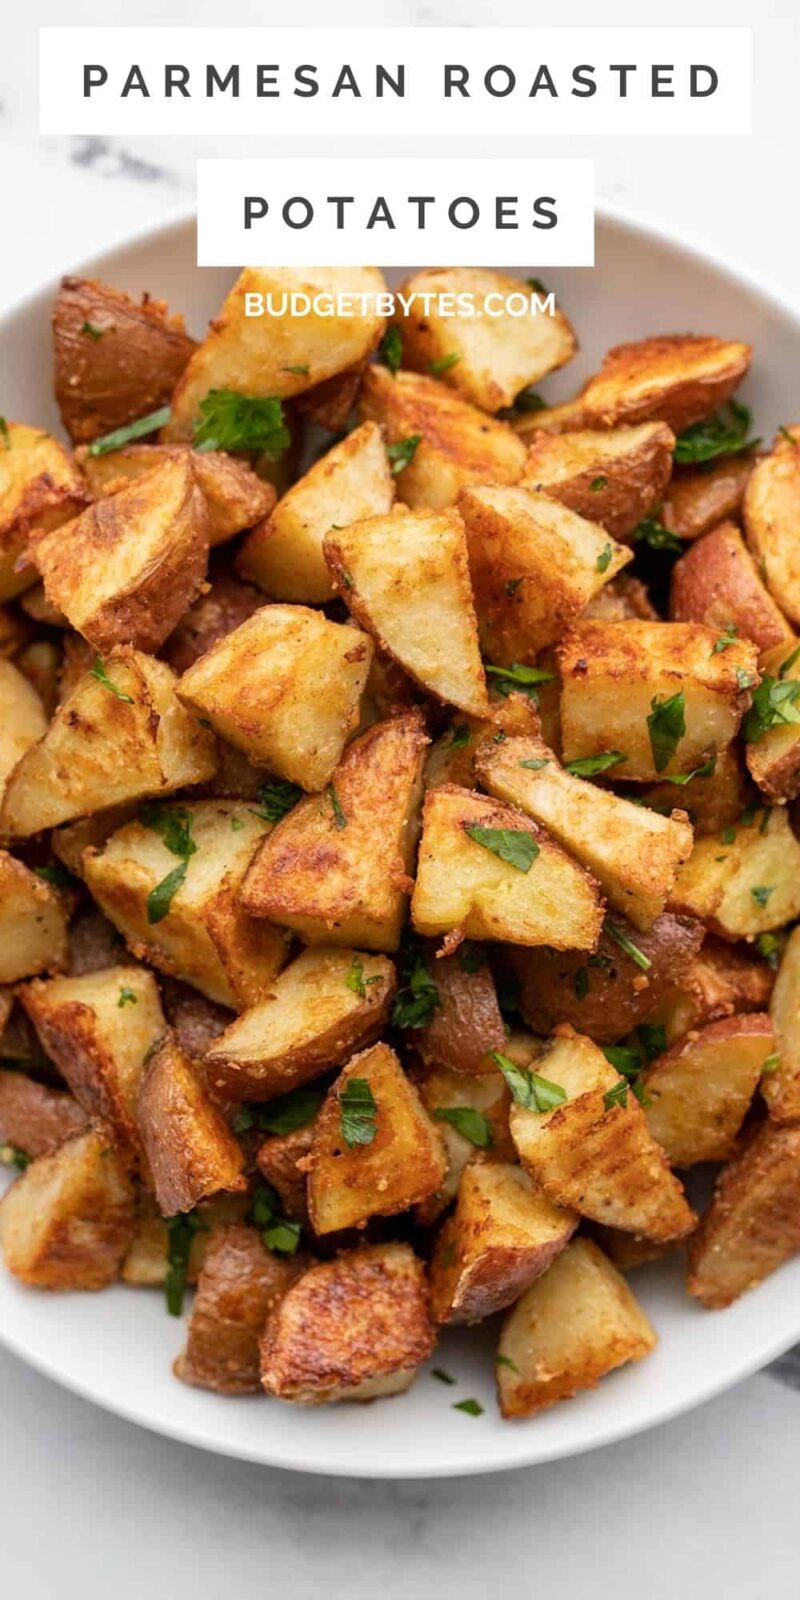 Parmesan roasted potatoes in a bowl, title text at the top